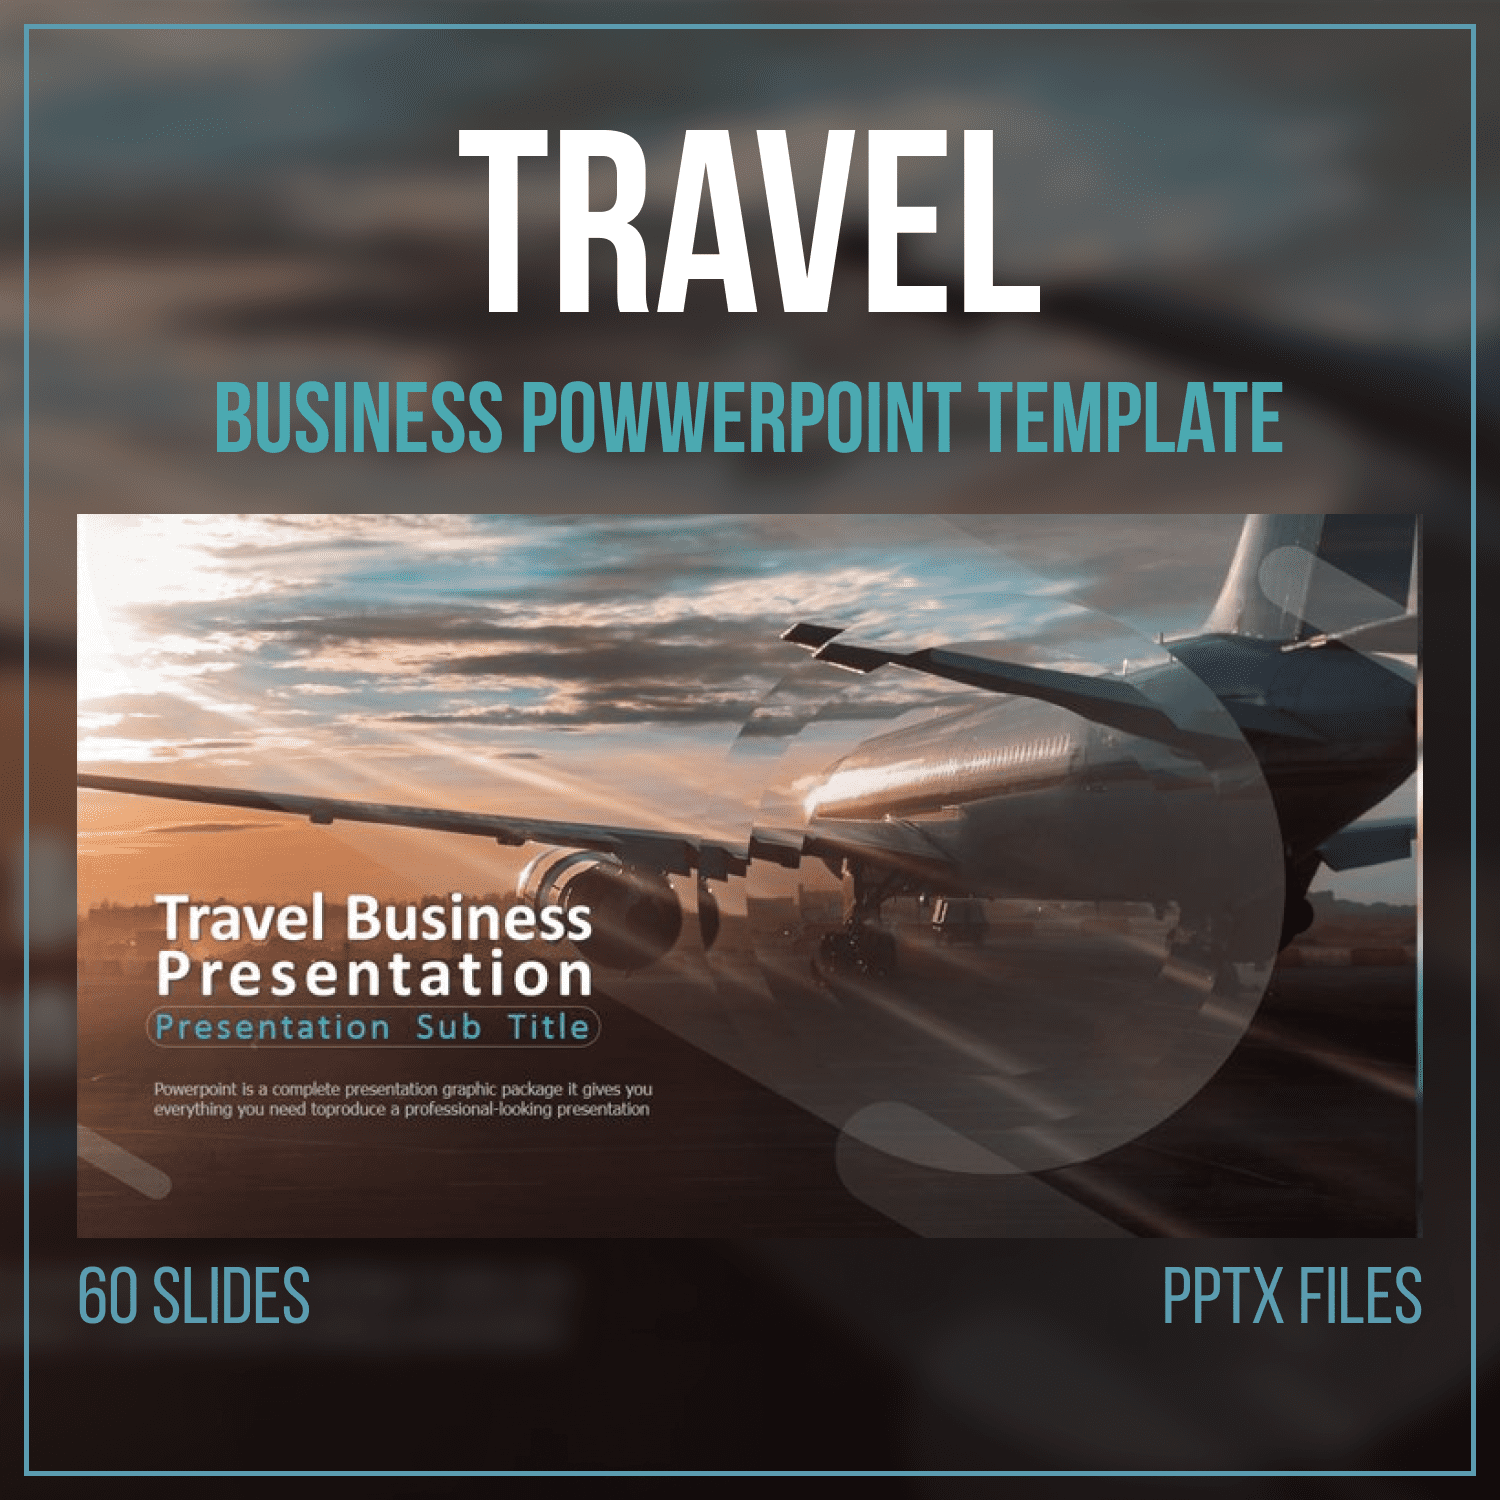 travel business powwerpoint template cover image.